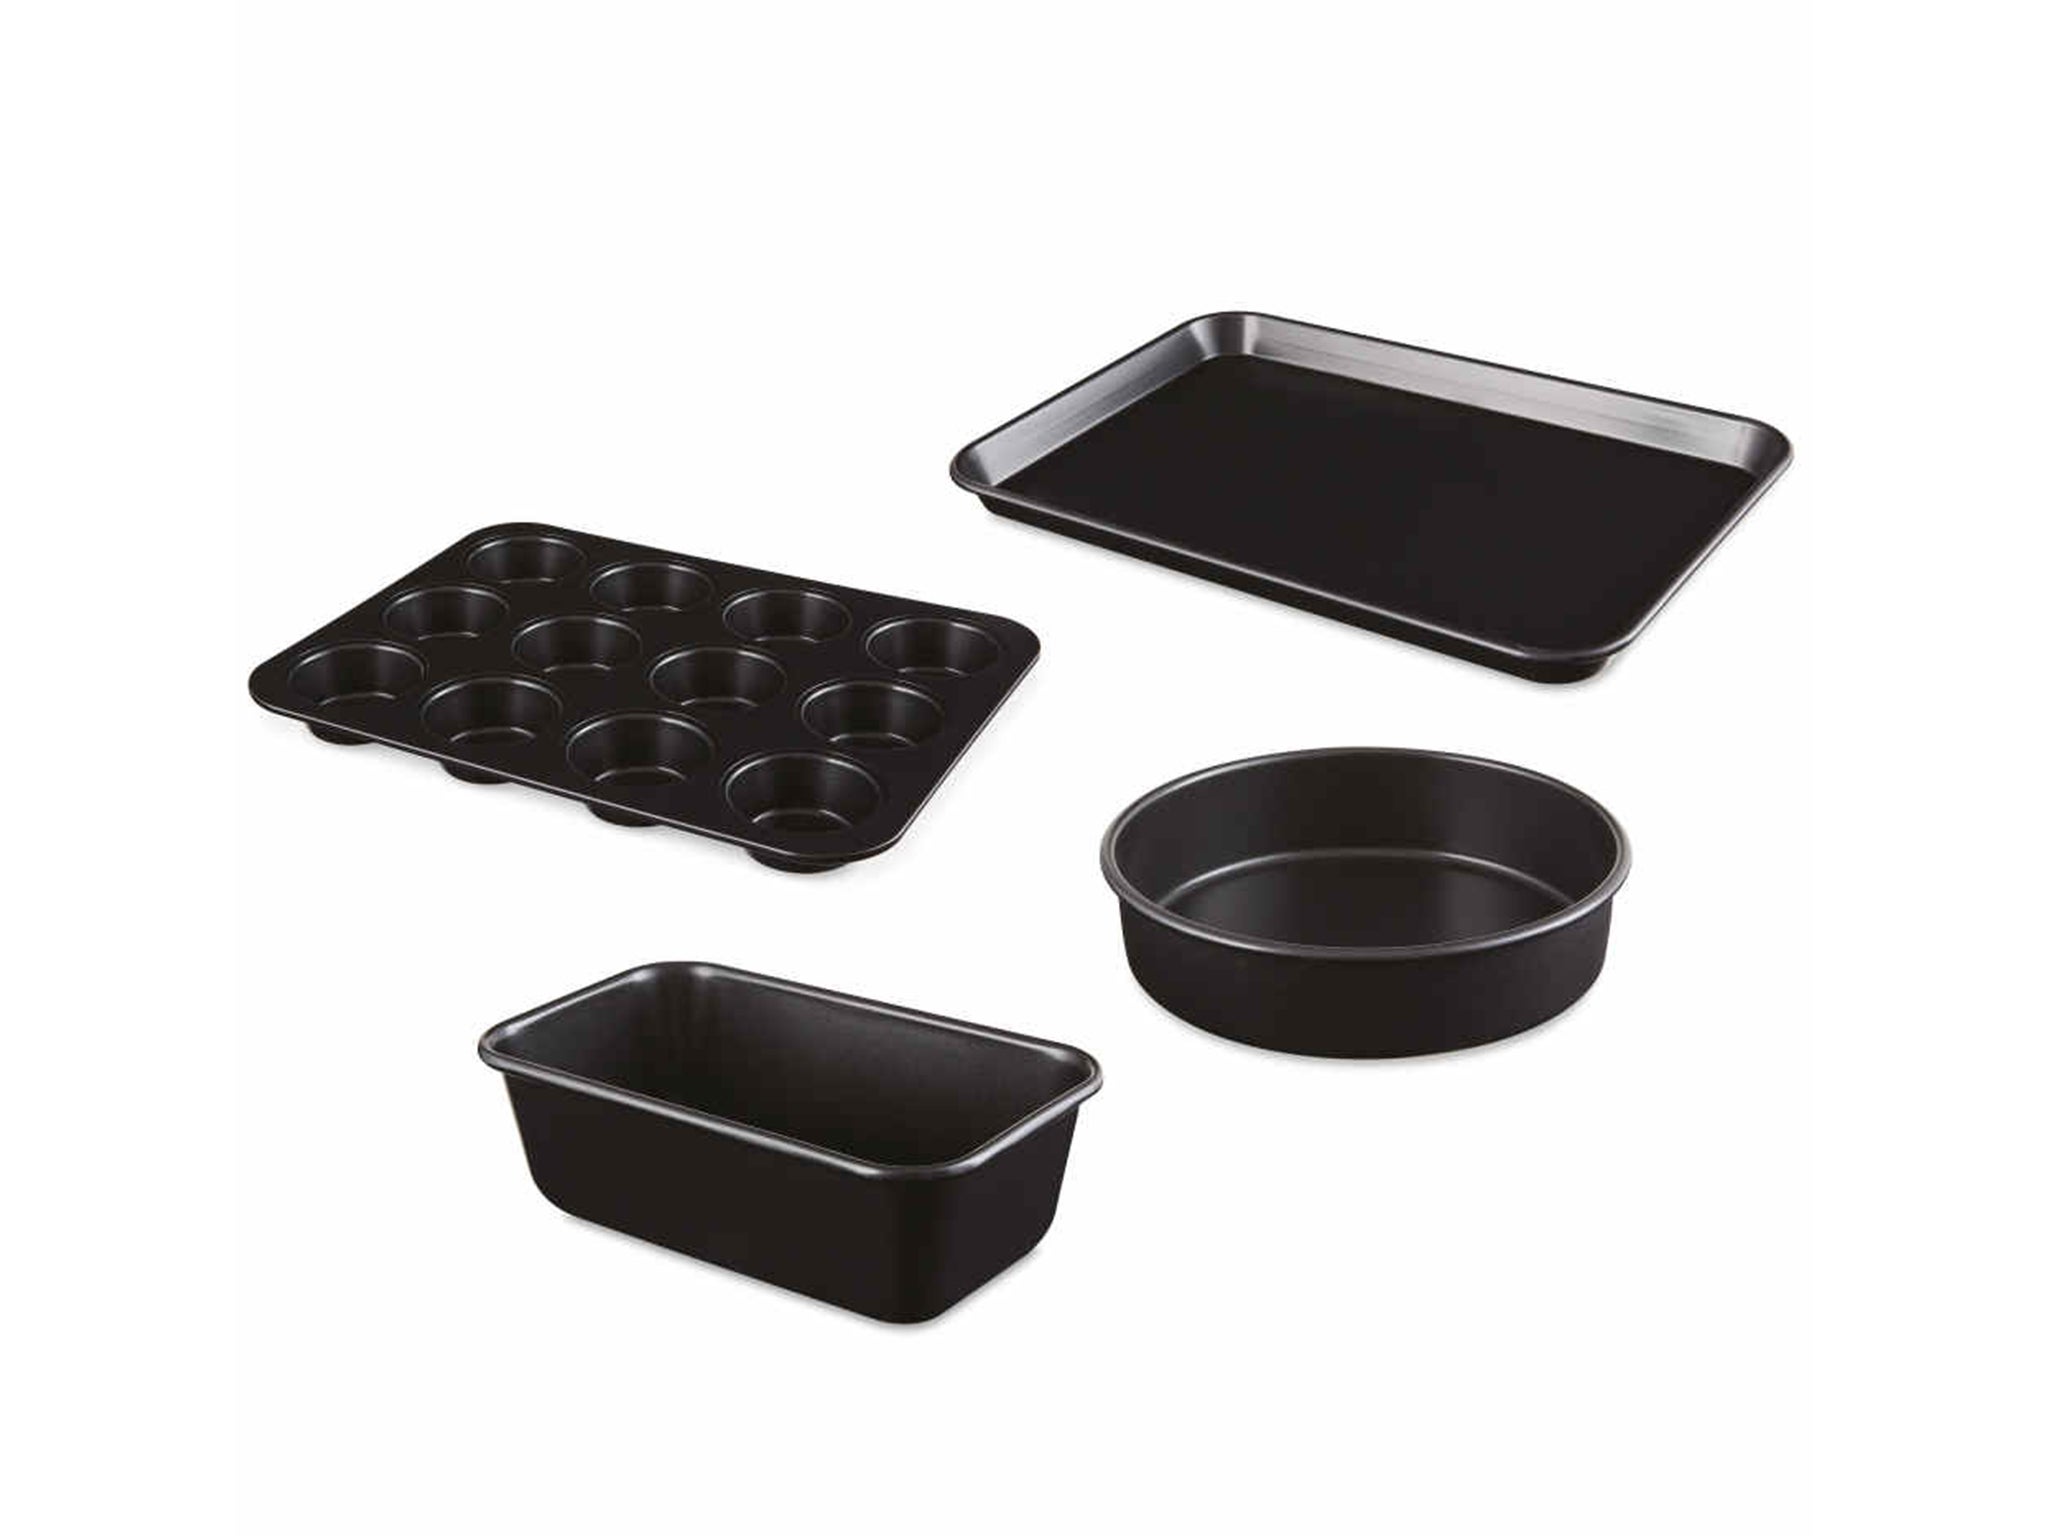 Don't attempt to bake anything without this set for every type of loaf, cake or cupcake